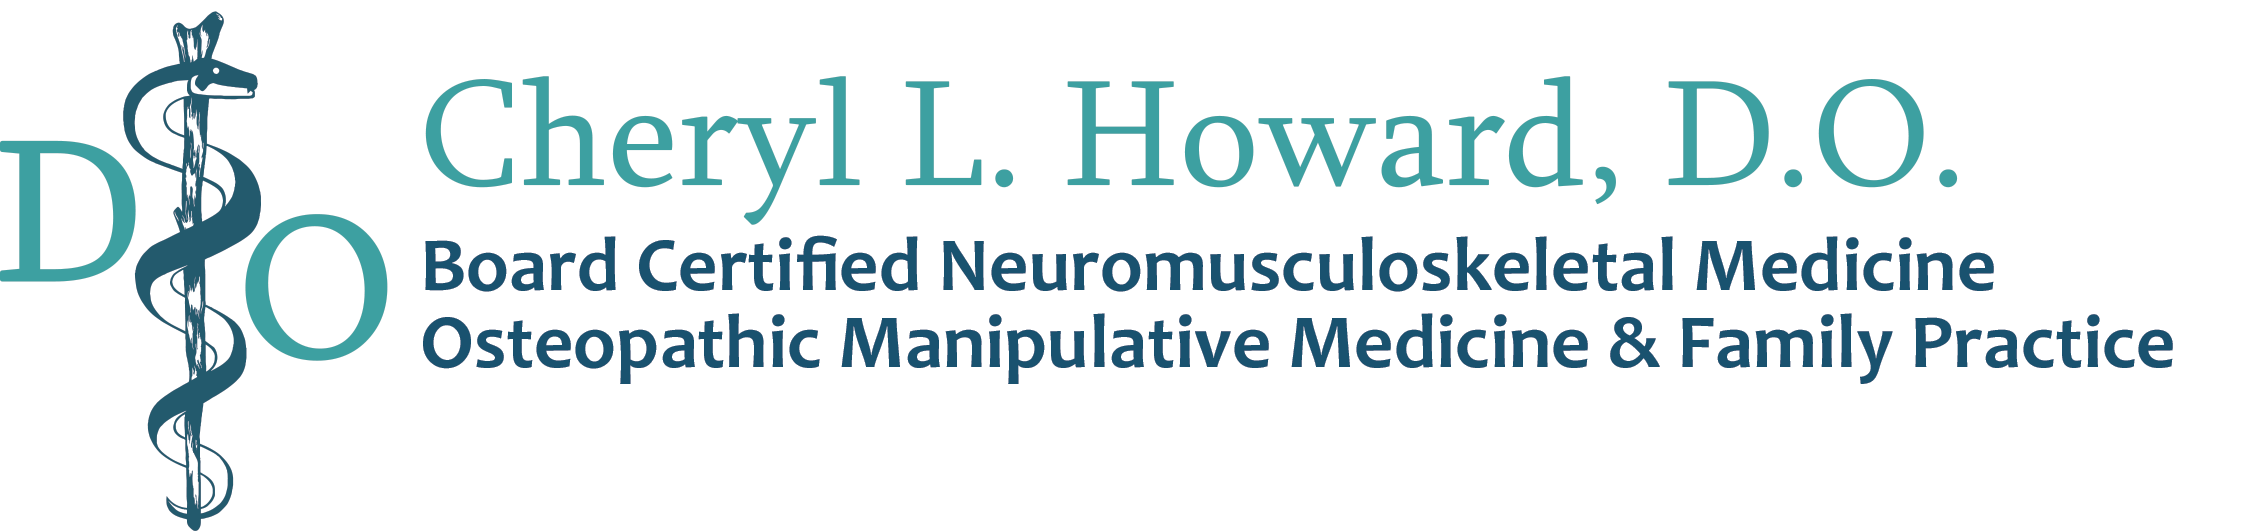 Cheryl L. Howard, D.O. Board Certified Neuromusculoskeletal Medicine, Osteopathic Manipulative Medicine and Family Practice